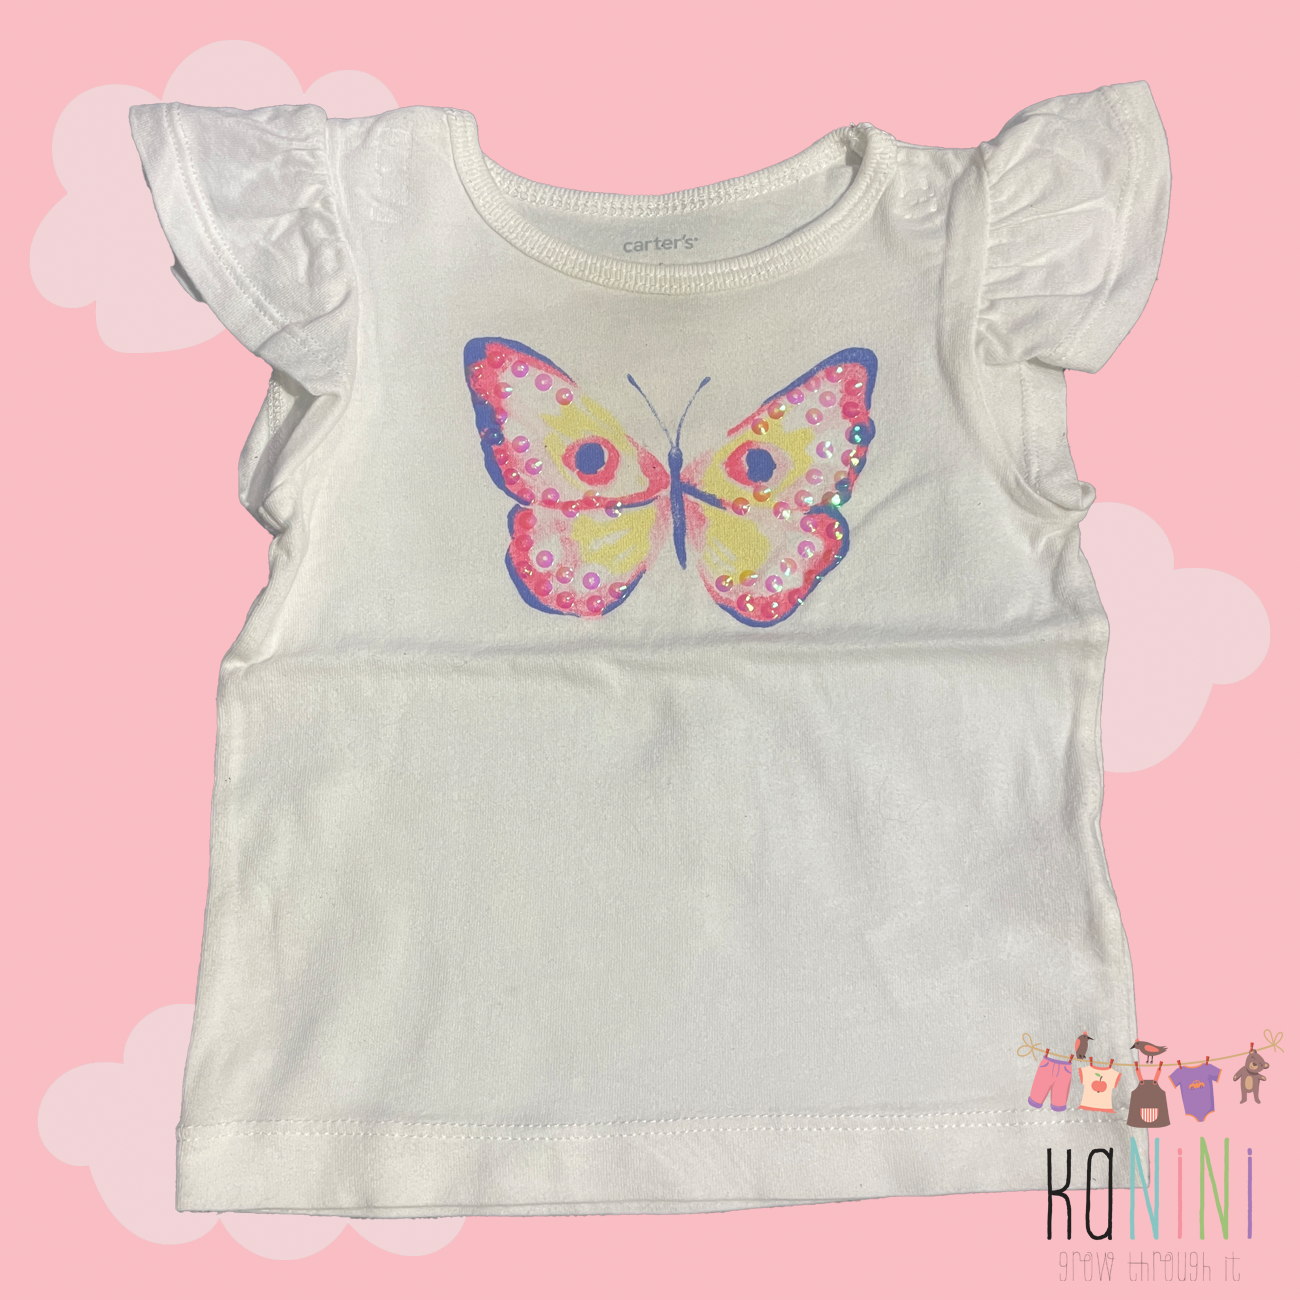 Featured image for “Carter's 6 Months Girls Butterfly White T-Shirt”